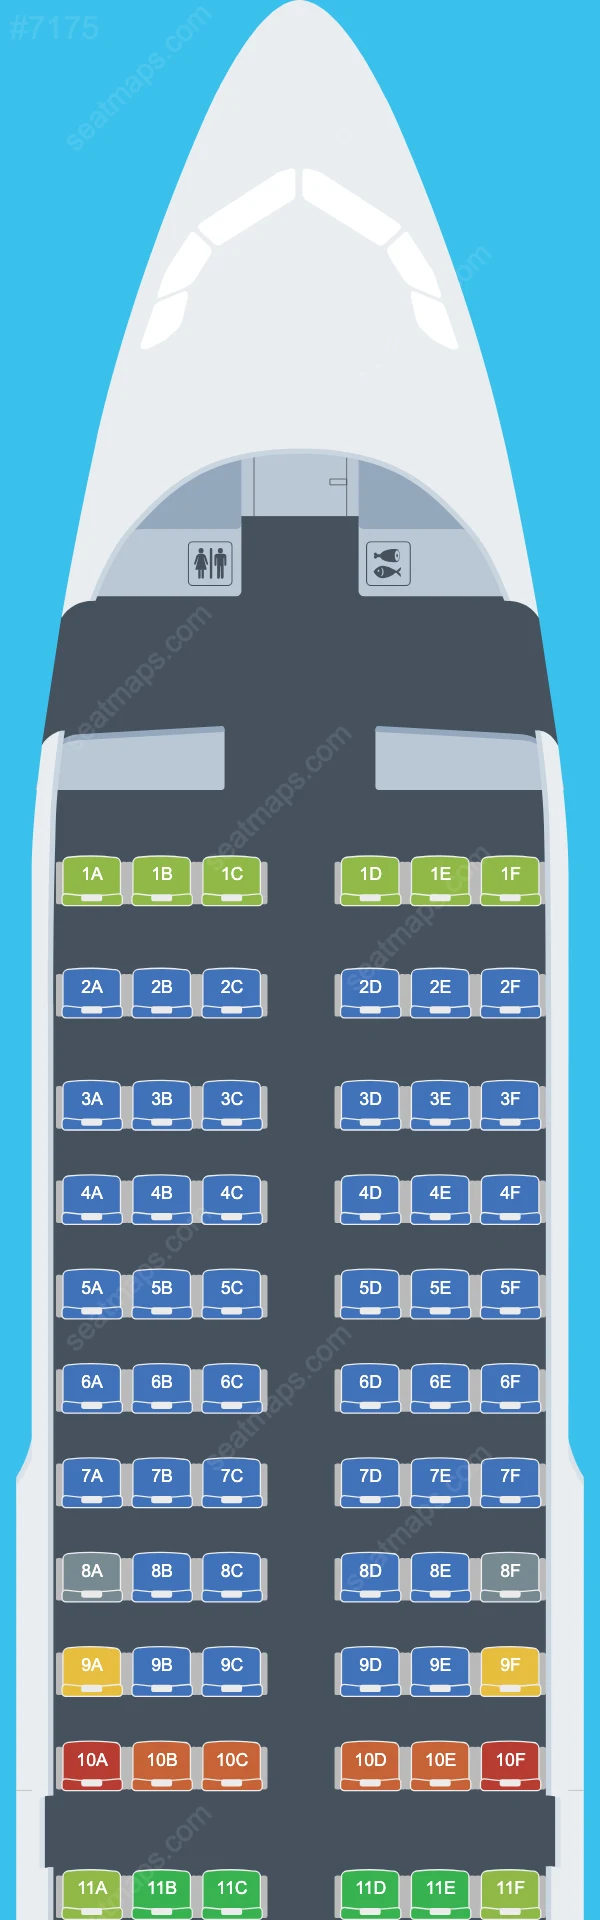 West Air Airbus A319-100 seatmap mobile preview